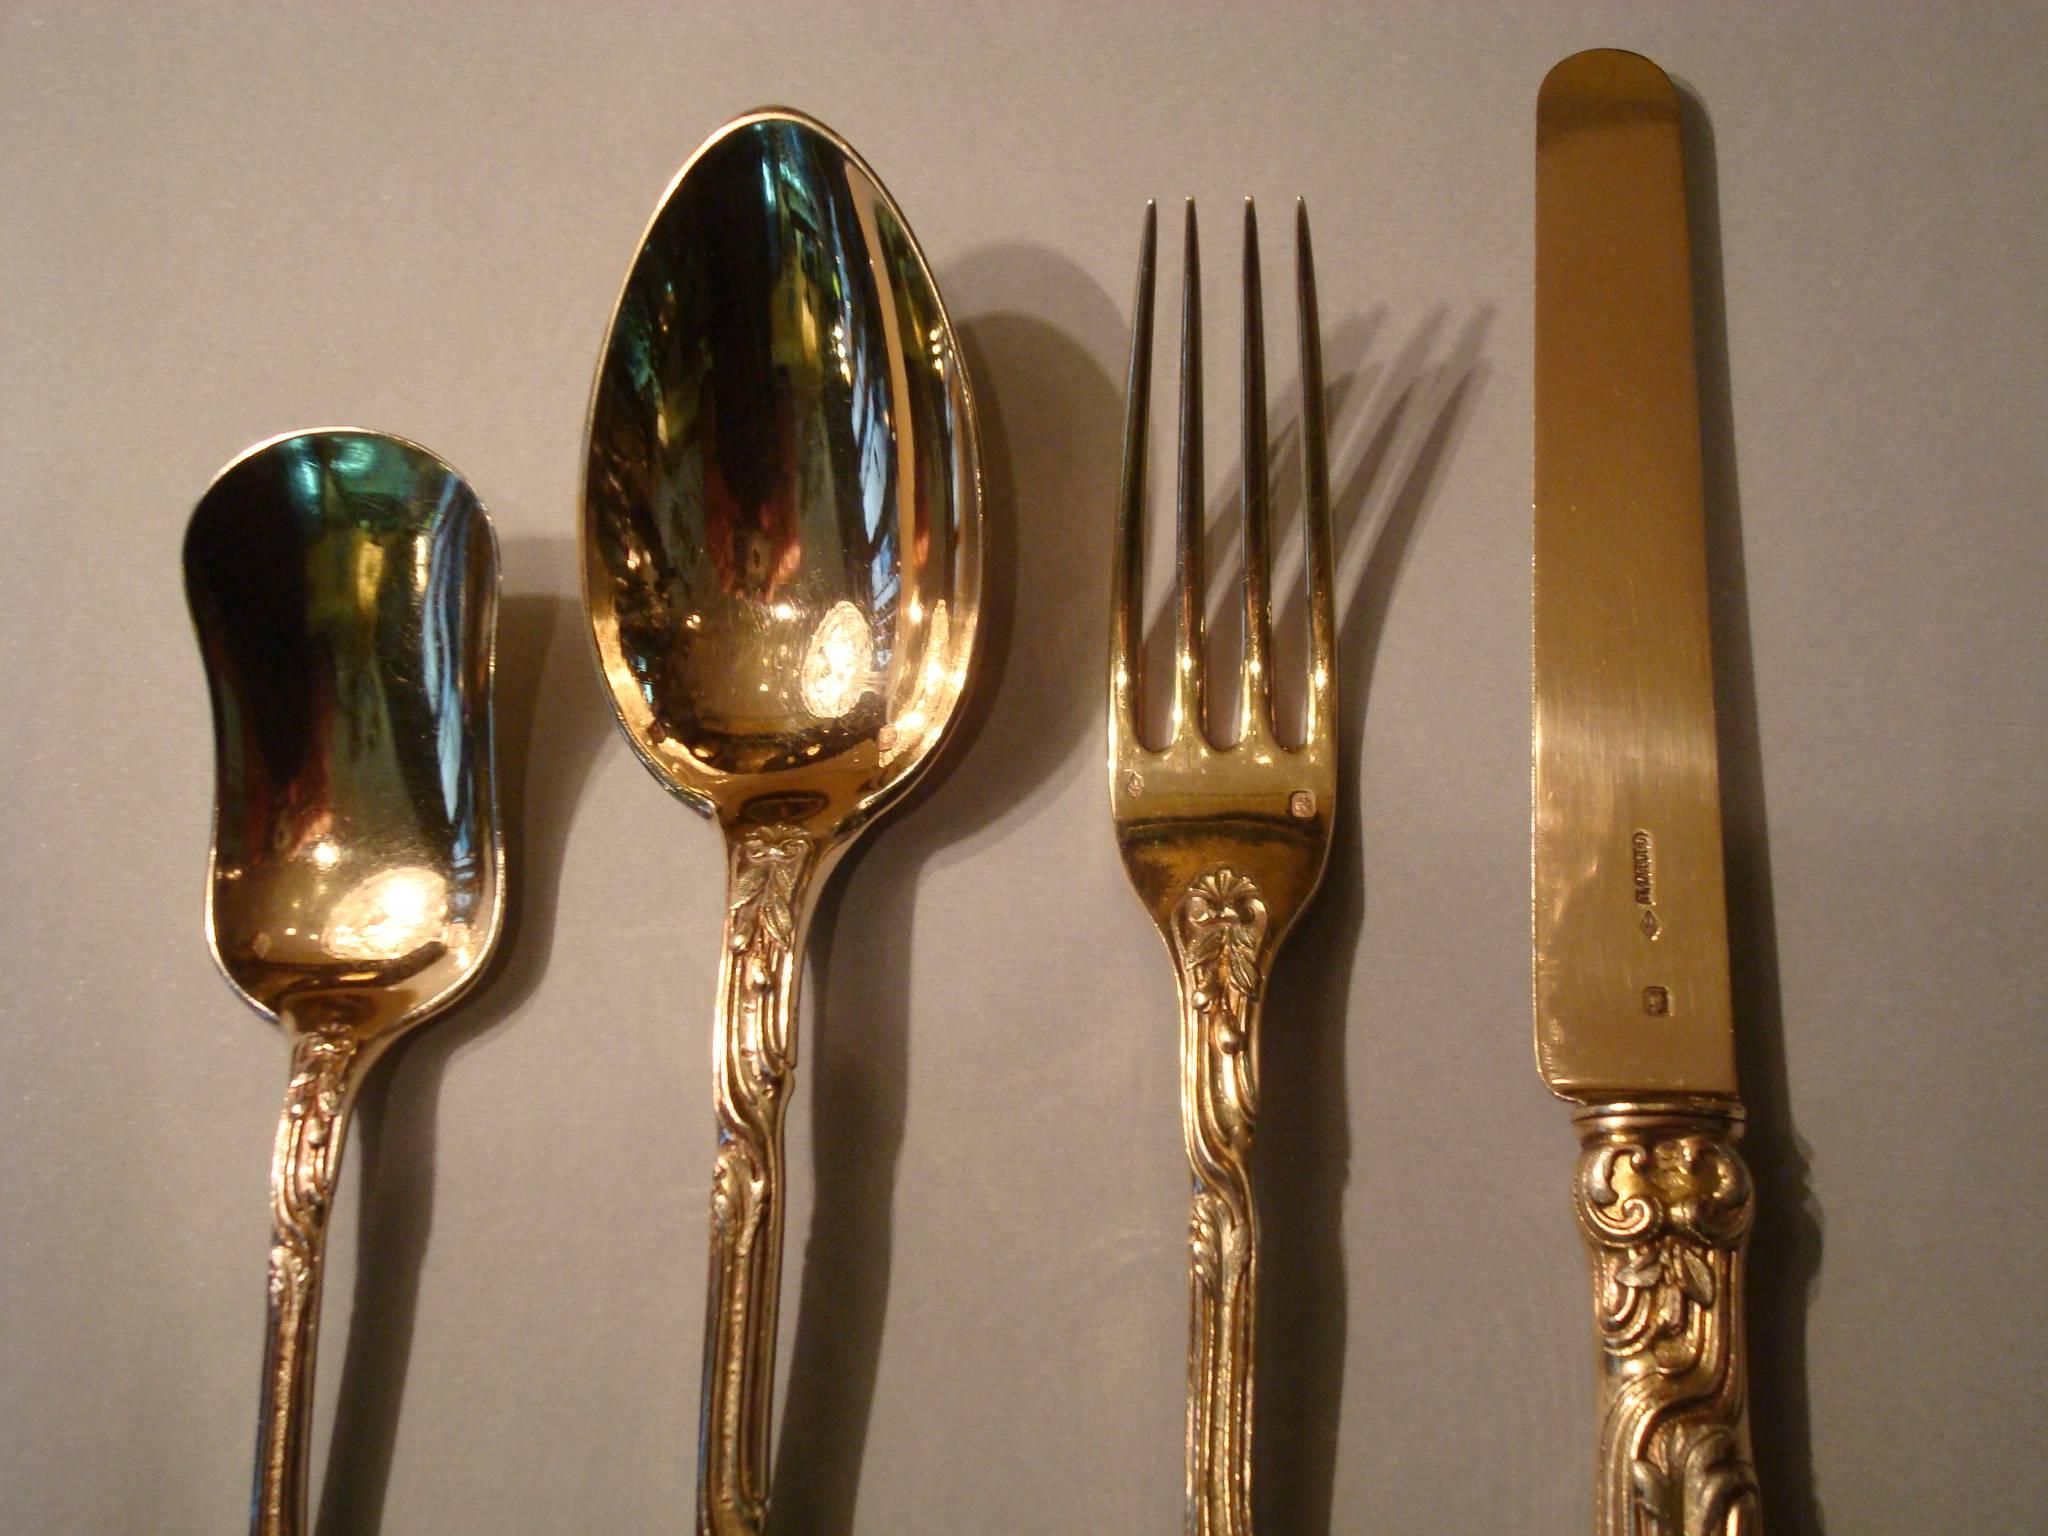 Gilt Rococo Odiot Meissonnier Sterling Silver Cutlery Flatware for 12, France